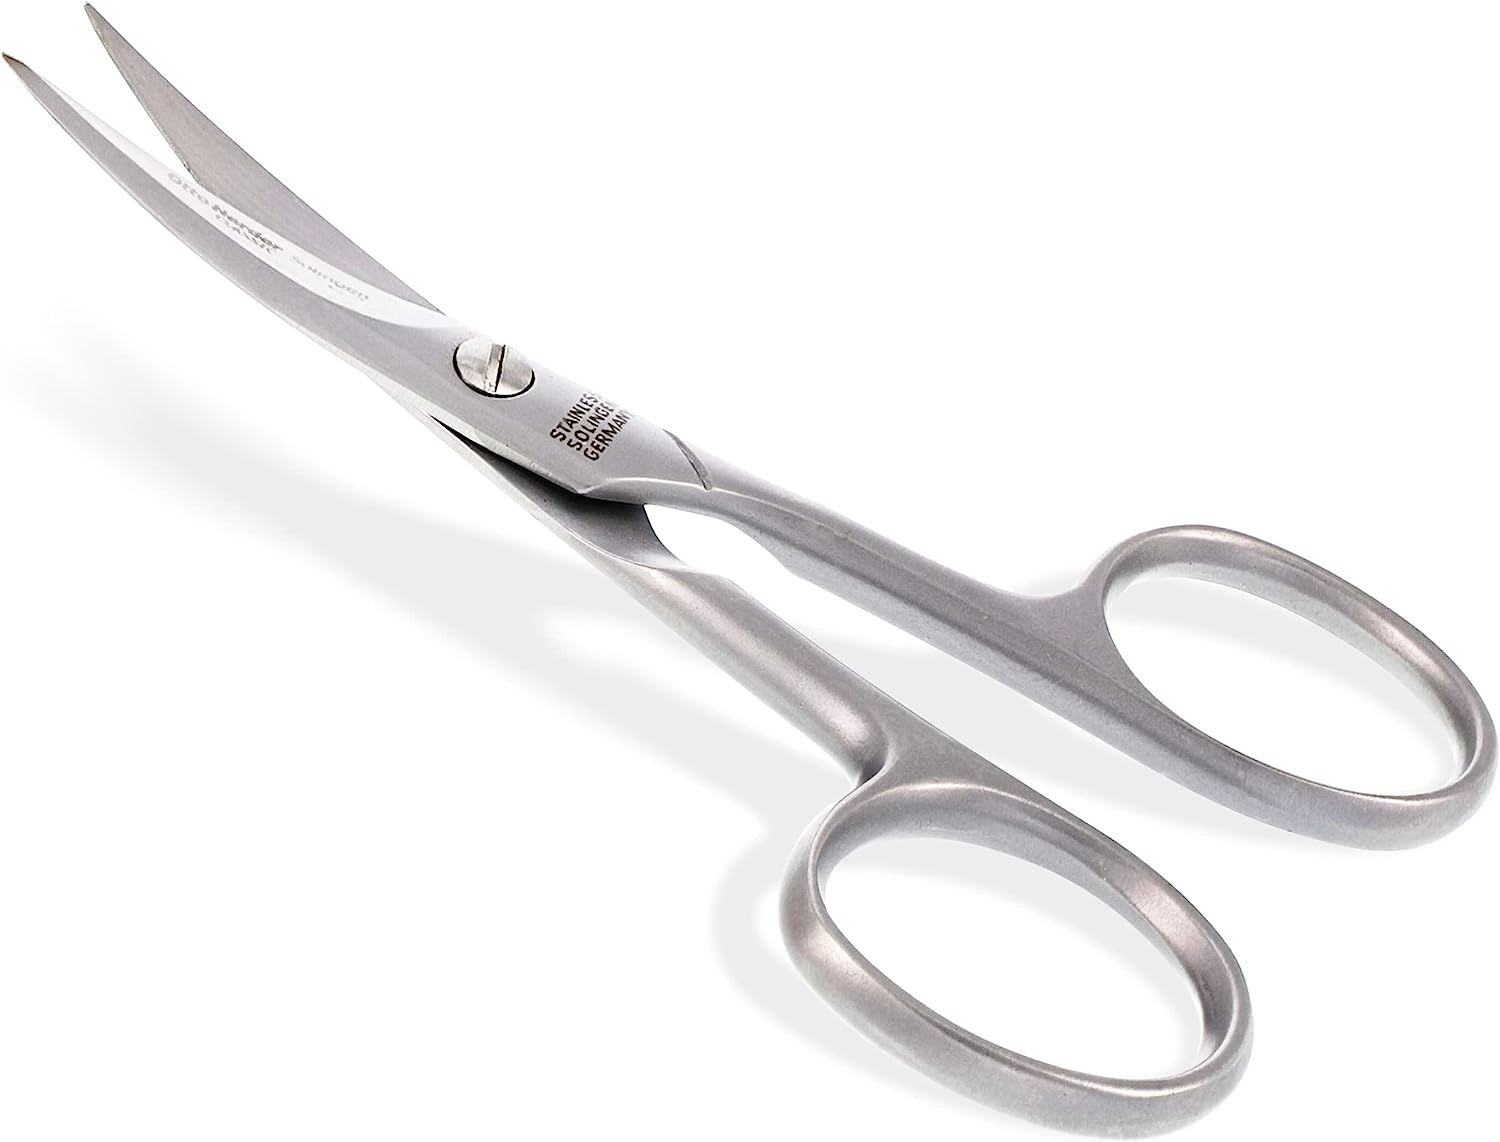 Otto Herder Professional Nail Scissors 10.5 cm, Rustproof from Solingen, Scissors with Sharp Curved Blade Made of Stainless Steel and One-Sided Micro-Teeth for Care of Fingernails and Toenails